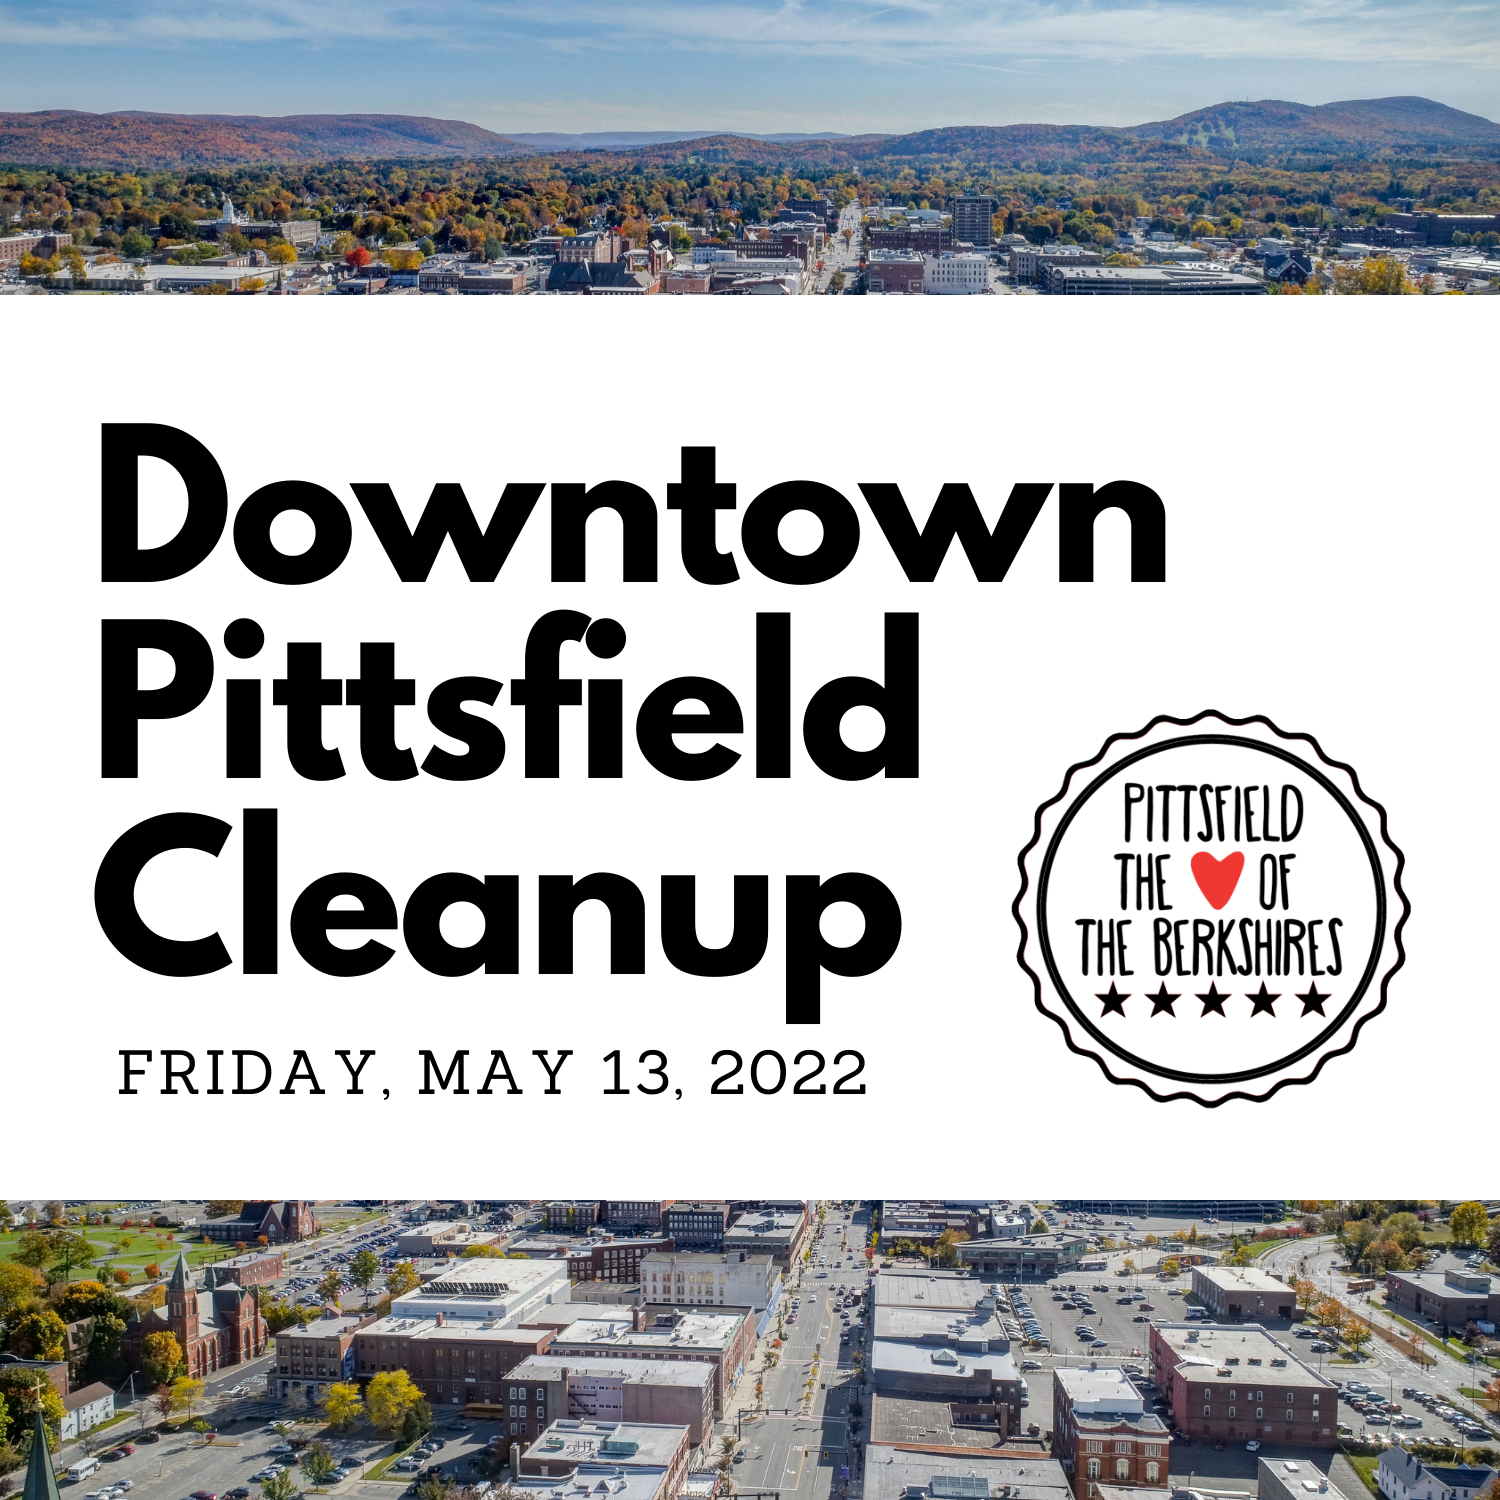 Downtown Pittsfield Cleanup